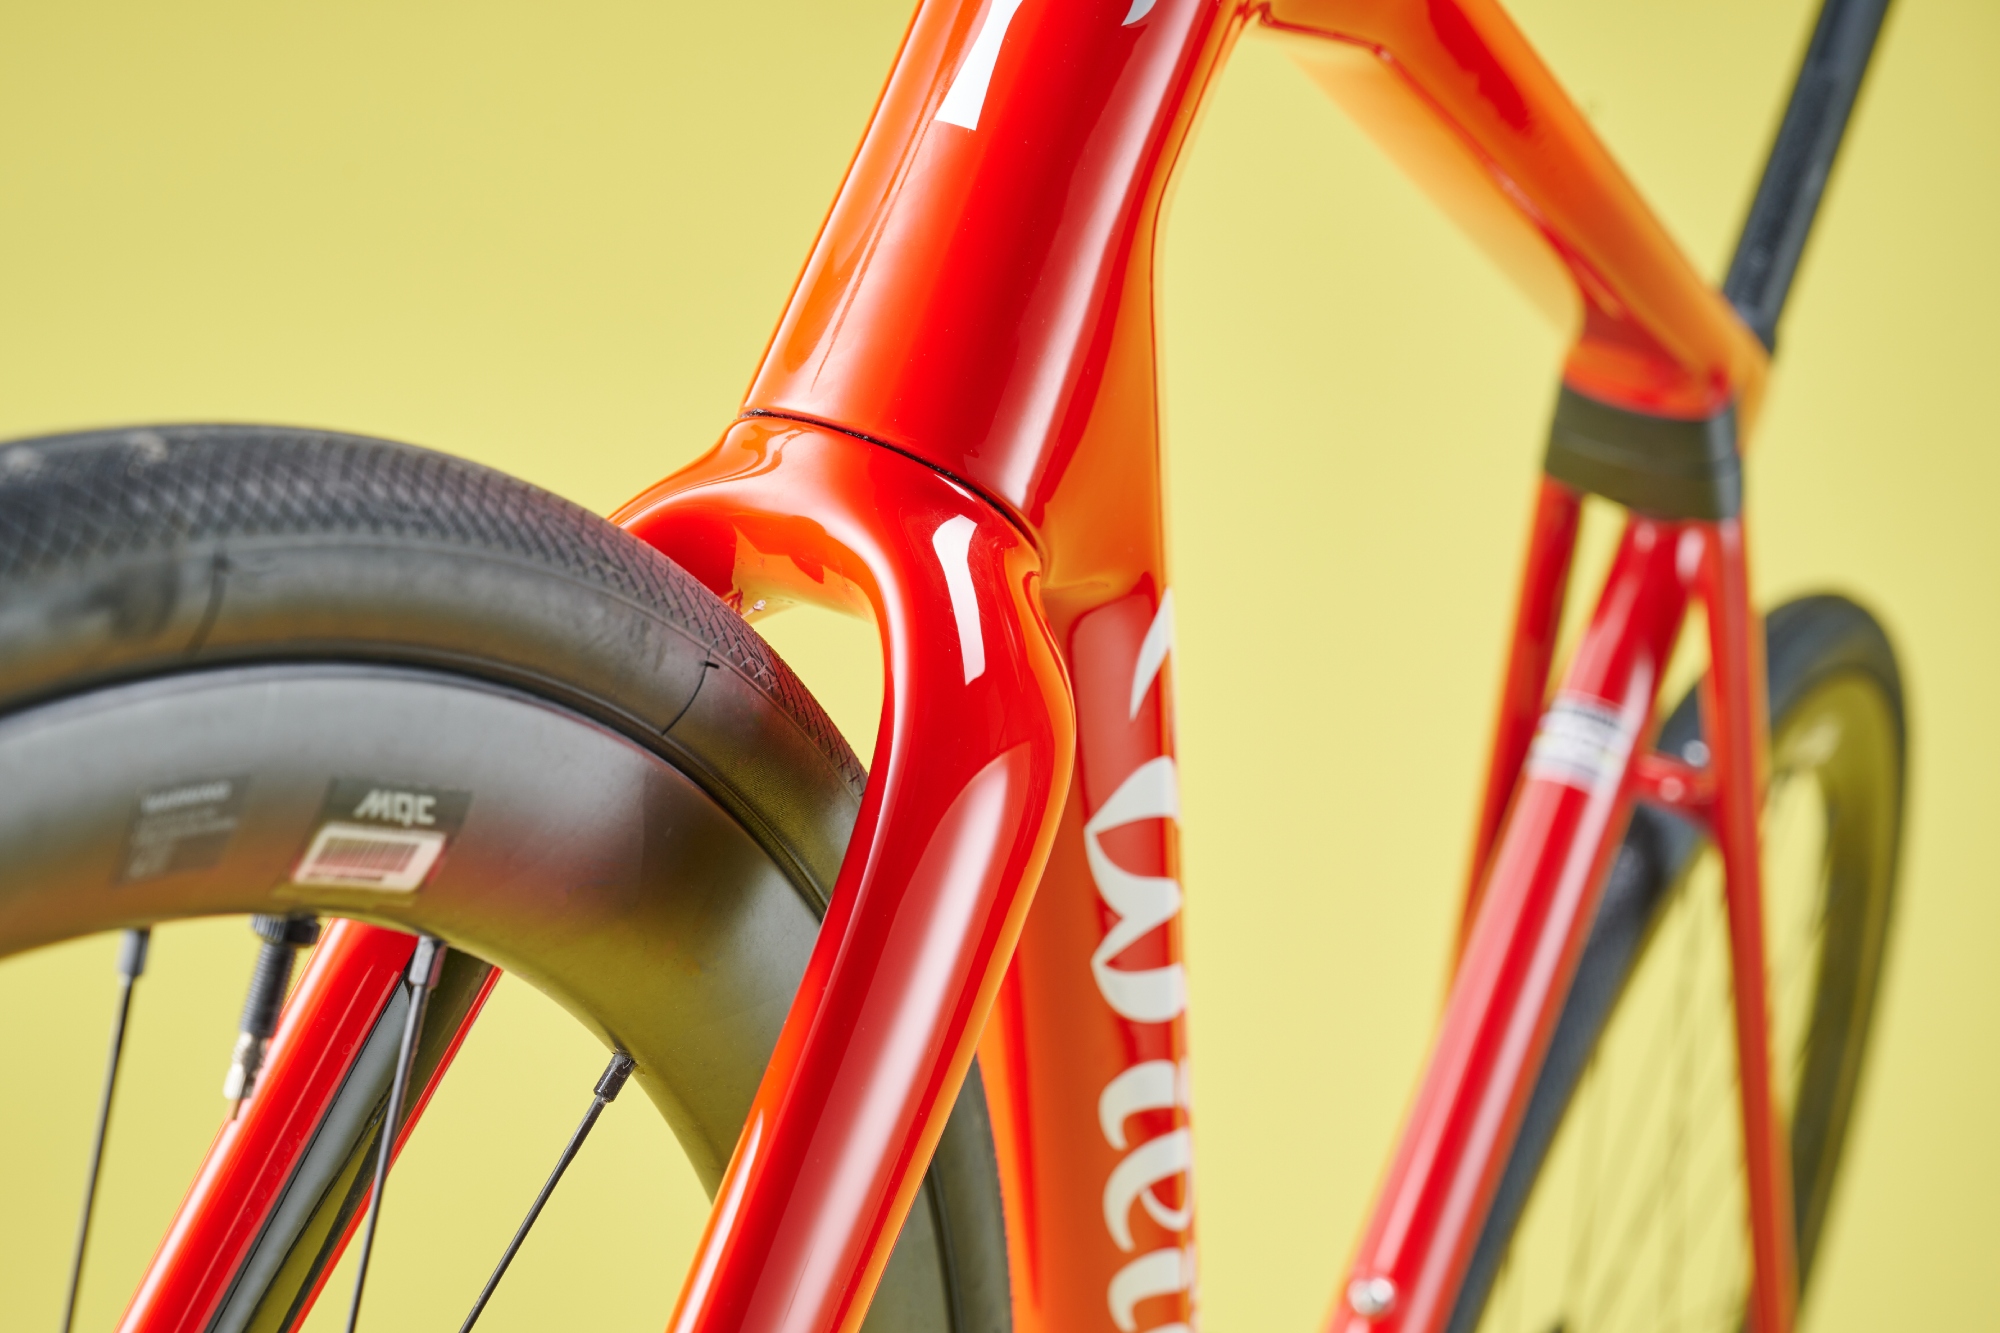 The Wilier Granturismo SLR Forks close up showing ample space for the wheel and tire